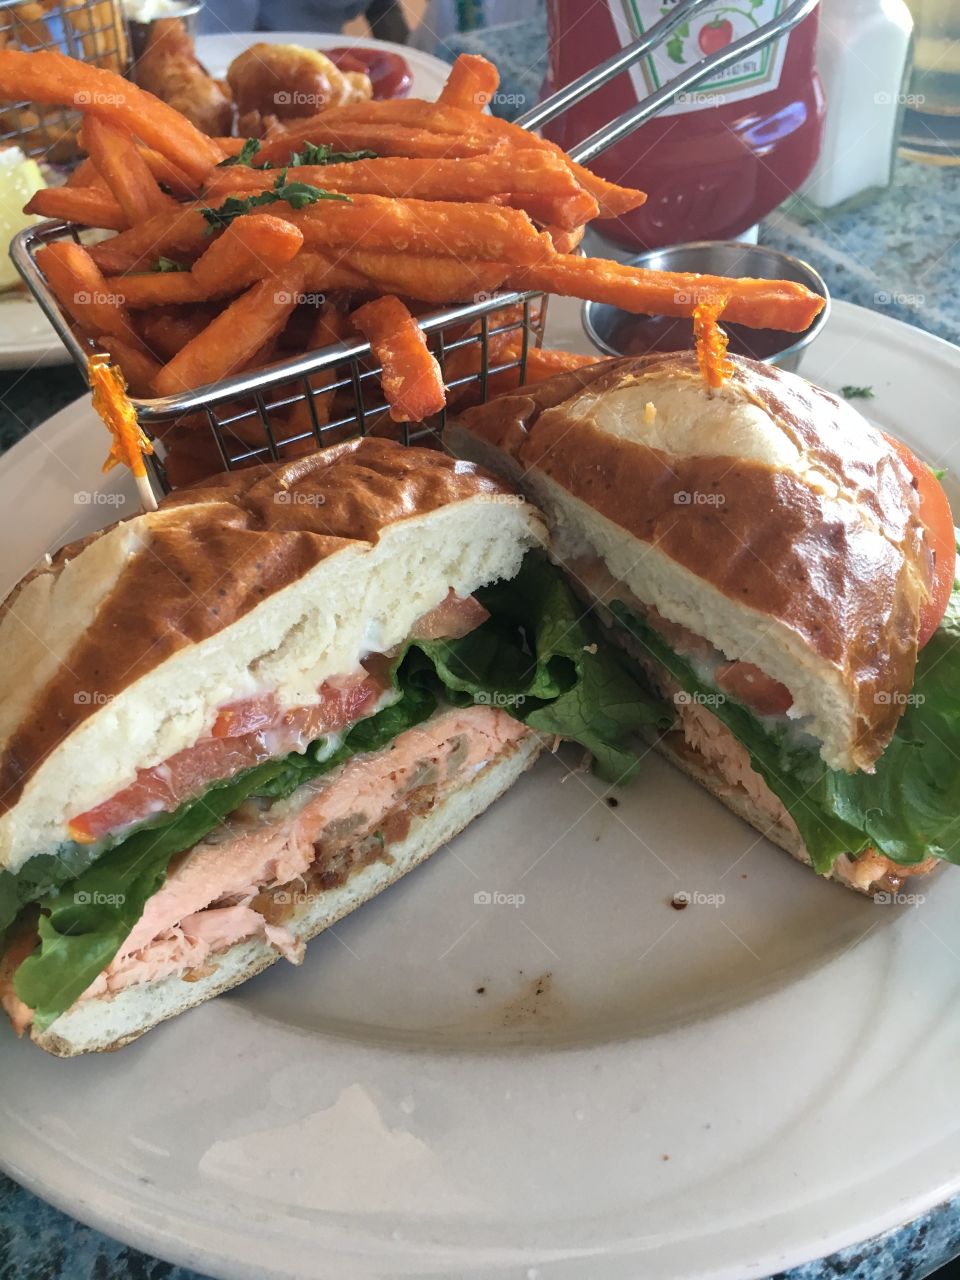 Cross-section of a delicious gourmet salmon sandwich with a basket of fresh sweet potato fries on the side!